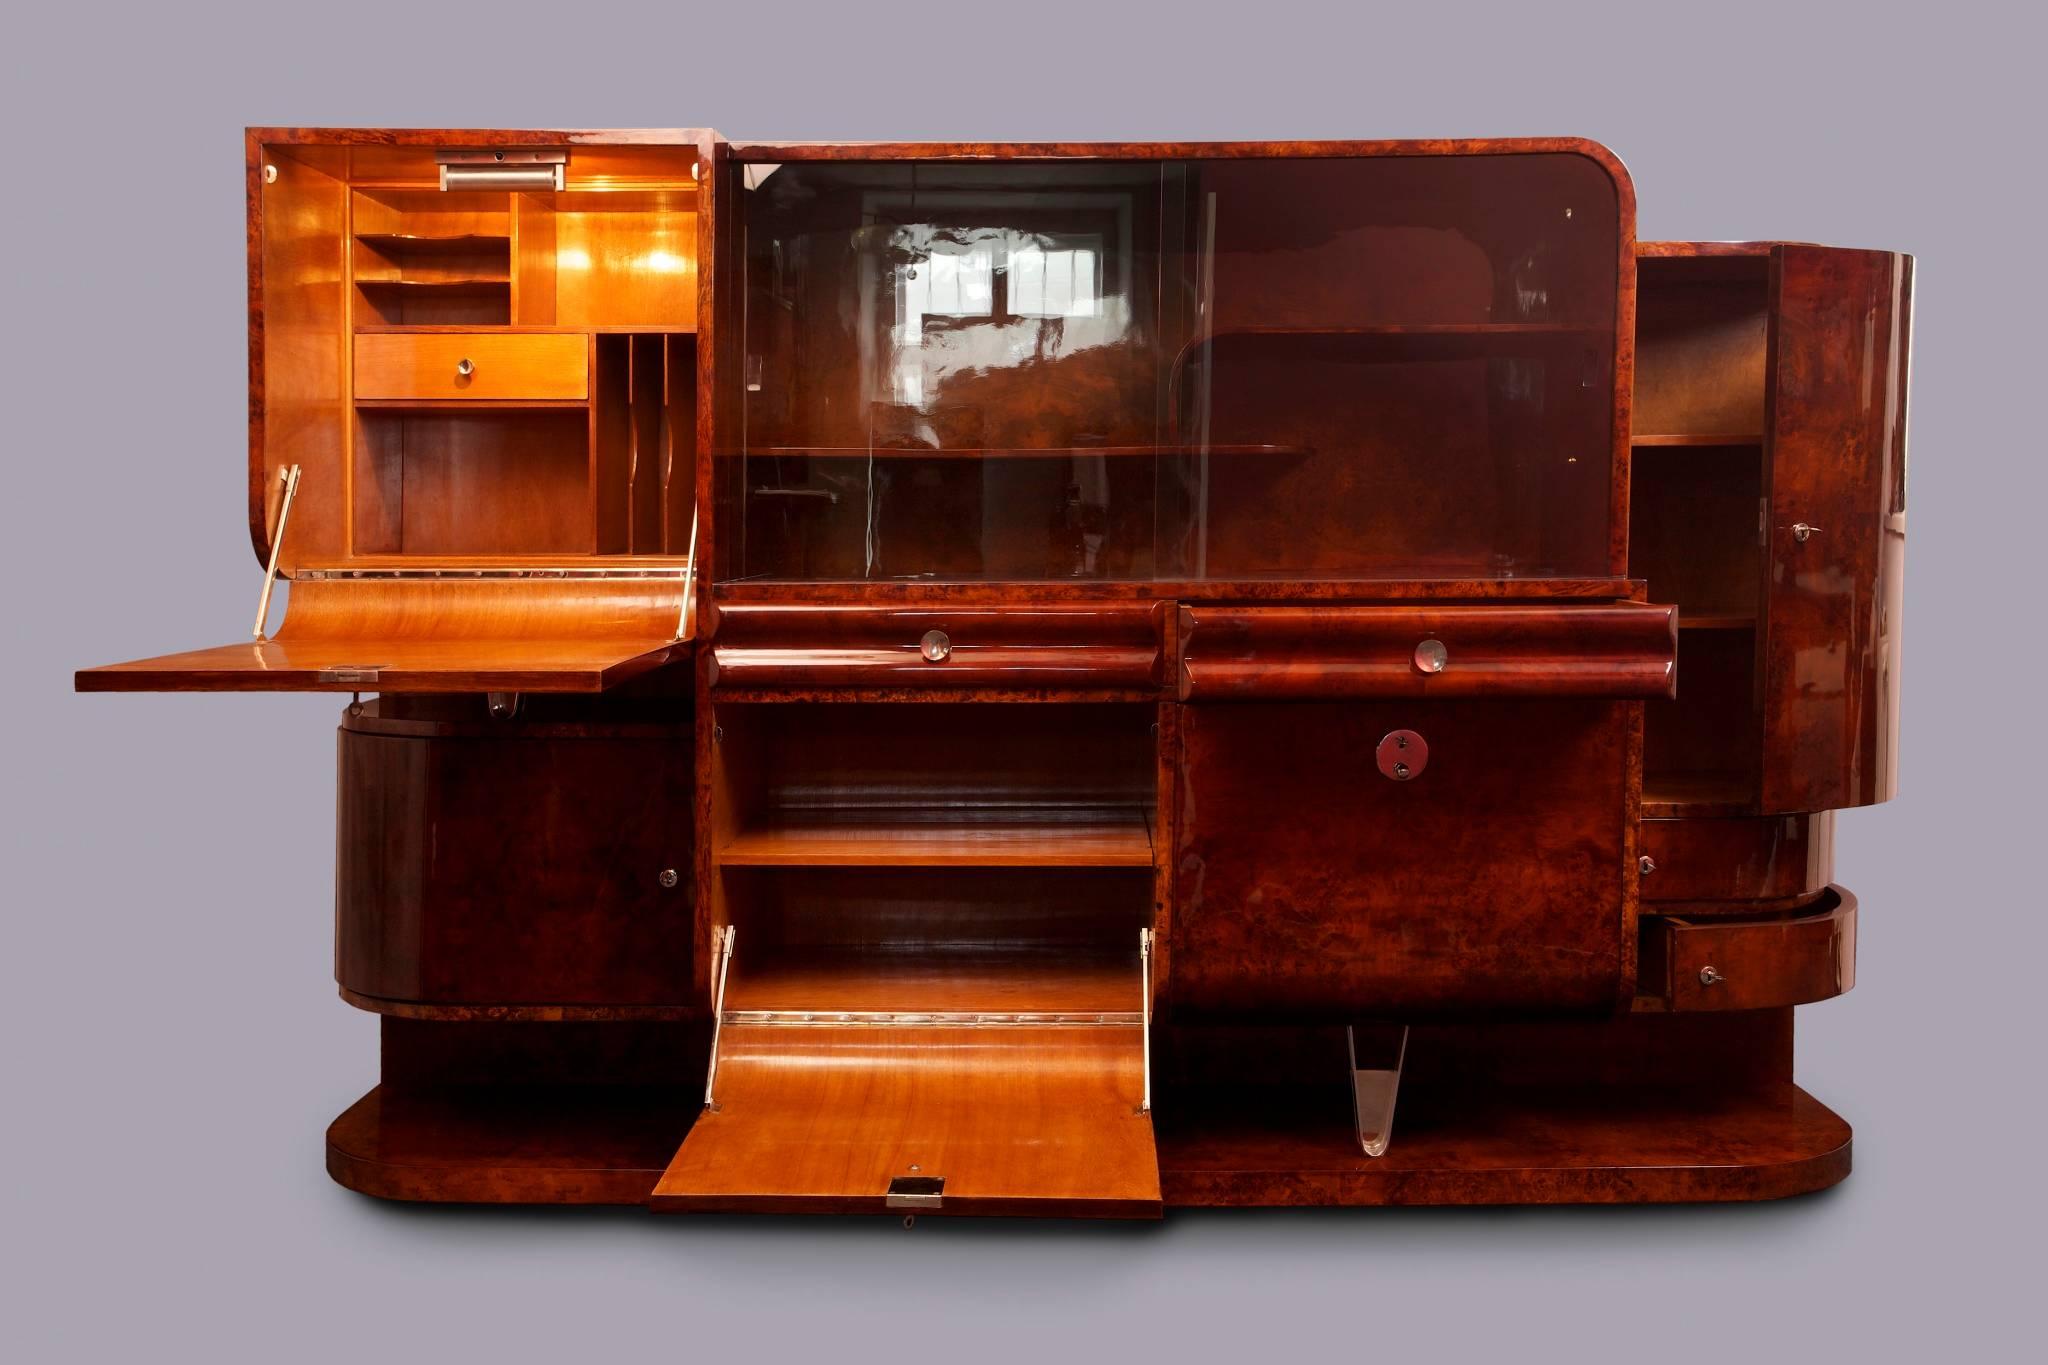 20th century Art Deco secretary sideboard
Completely restored to the high glossh.
Material: Walnut.
Source: Czechoslovakia.

We guarantee safe a the cheapest air transport from Europe to the whole world within 7 days.
The price is the same as for